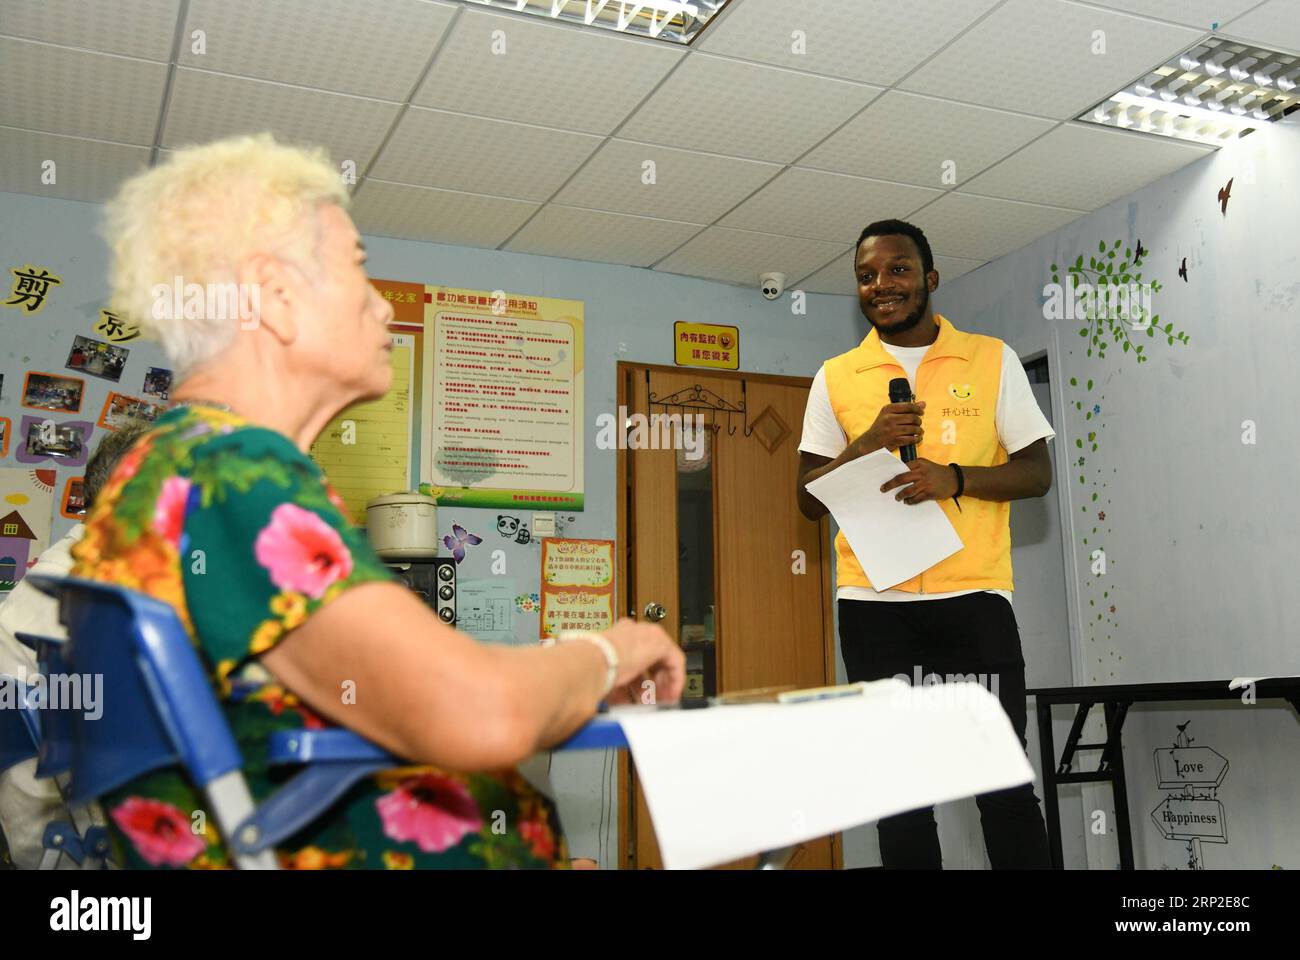 (180901) -- GUANGZHOU, Sept. 1, 2018 -- African student Kabey Heritier Lweny (R) teaches Chinese senior citizens English in Guangzhou, south China s Guangdong Province, Aug. 29, 2018. Kabey, who comes from the Democratic Republic of Congo, came to Guangdong University of Technology as a Chinese language major about a year ago. The rich Chinese cuisine and culture have always appealed to him, but it s by taking part in various volunteer activities that has made him embrace the life in Guangzhou ever more closely. I grew to learn more about the Chinese traditions and lifestyles as I joined Chine Stock Photo